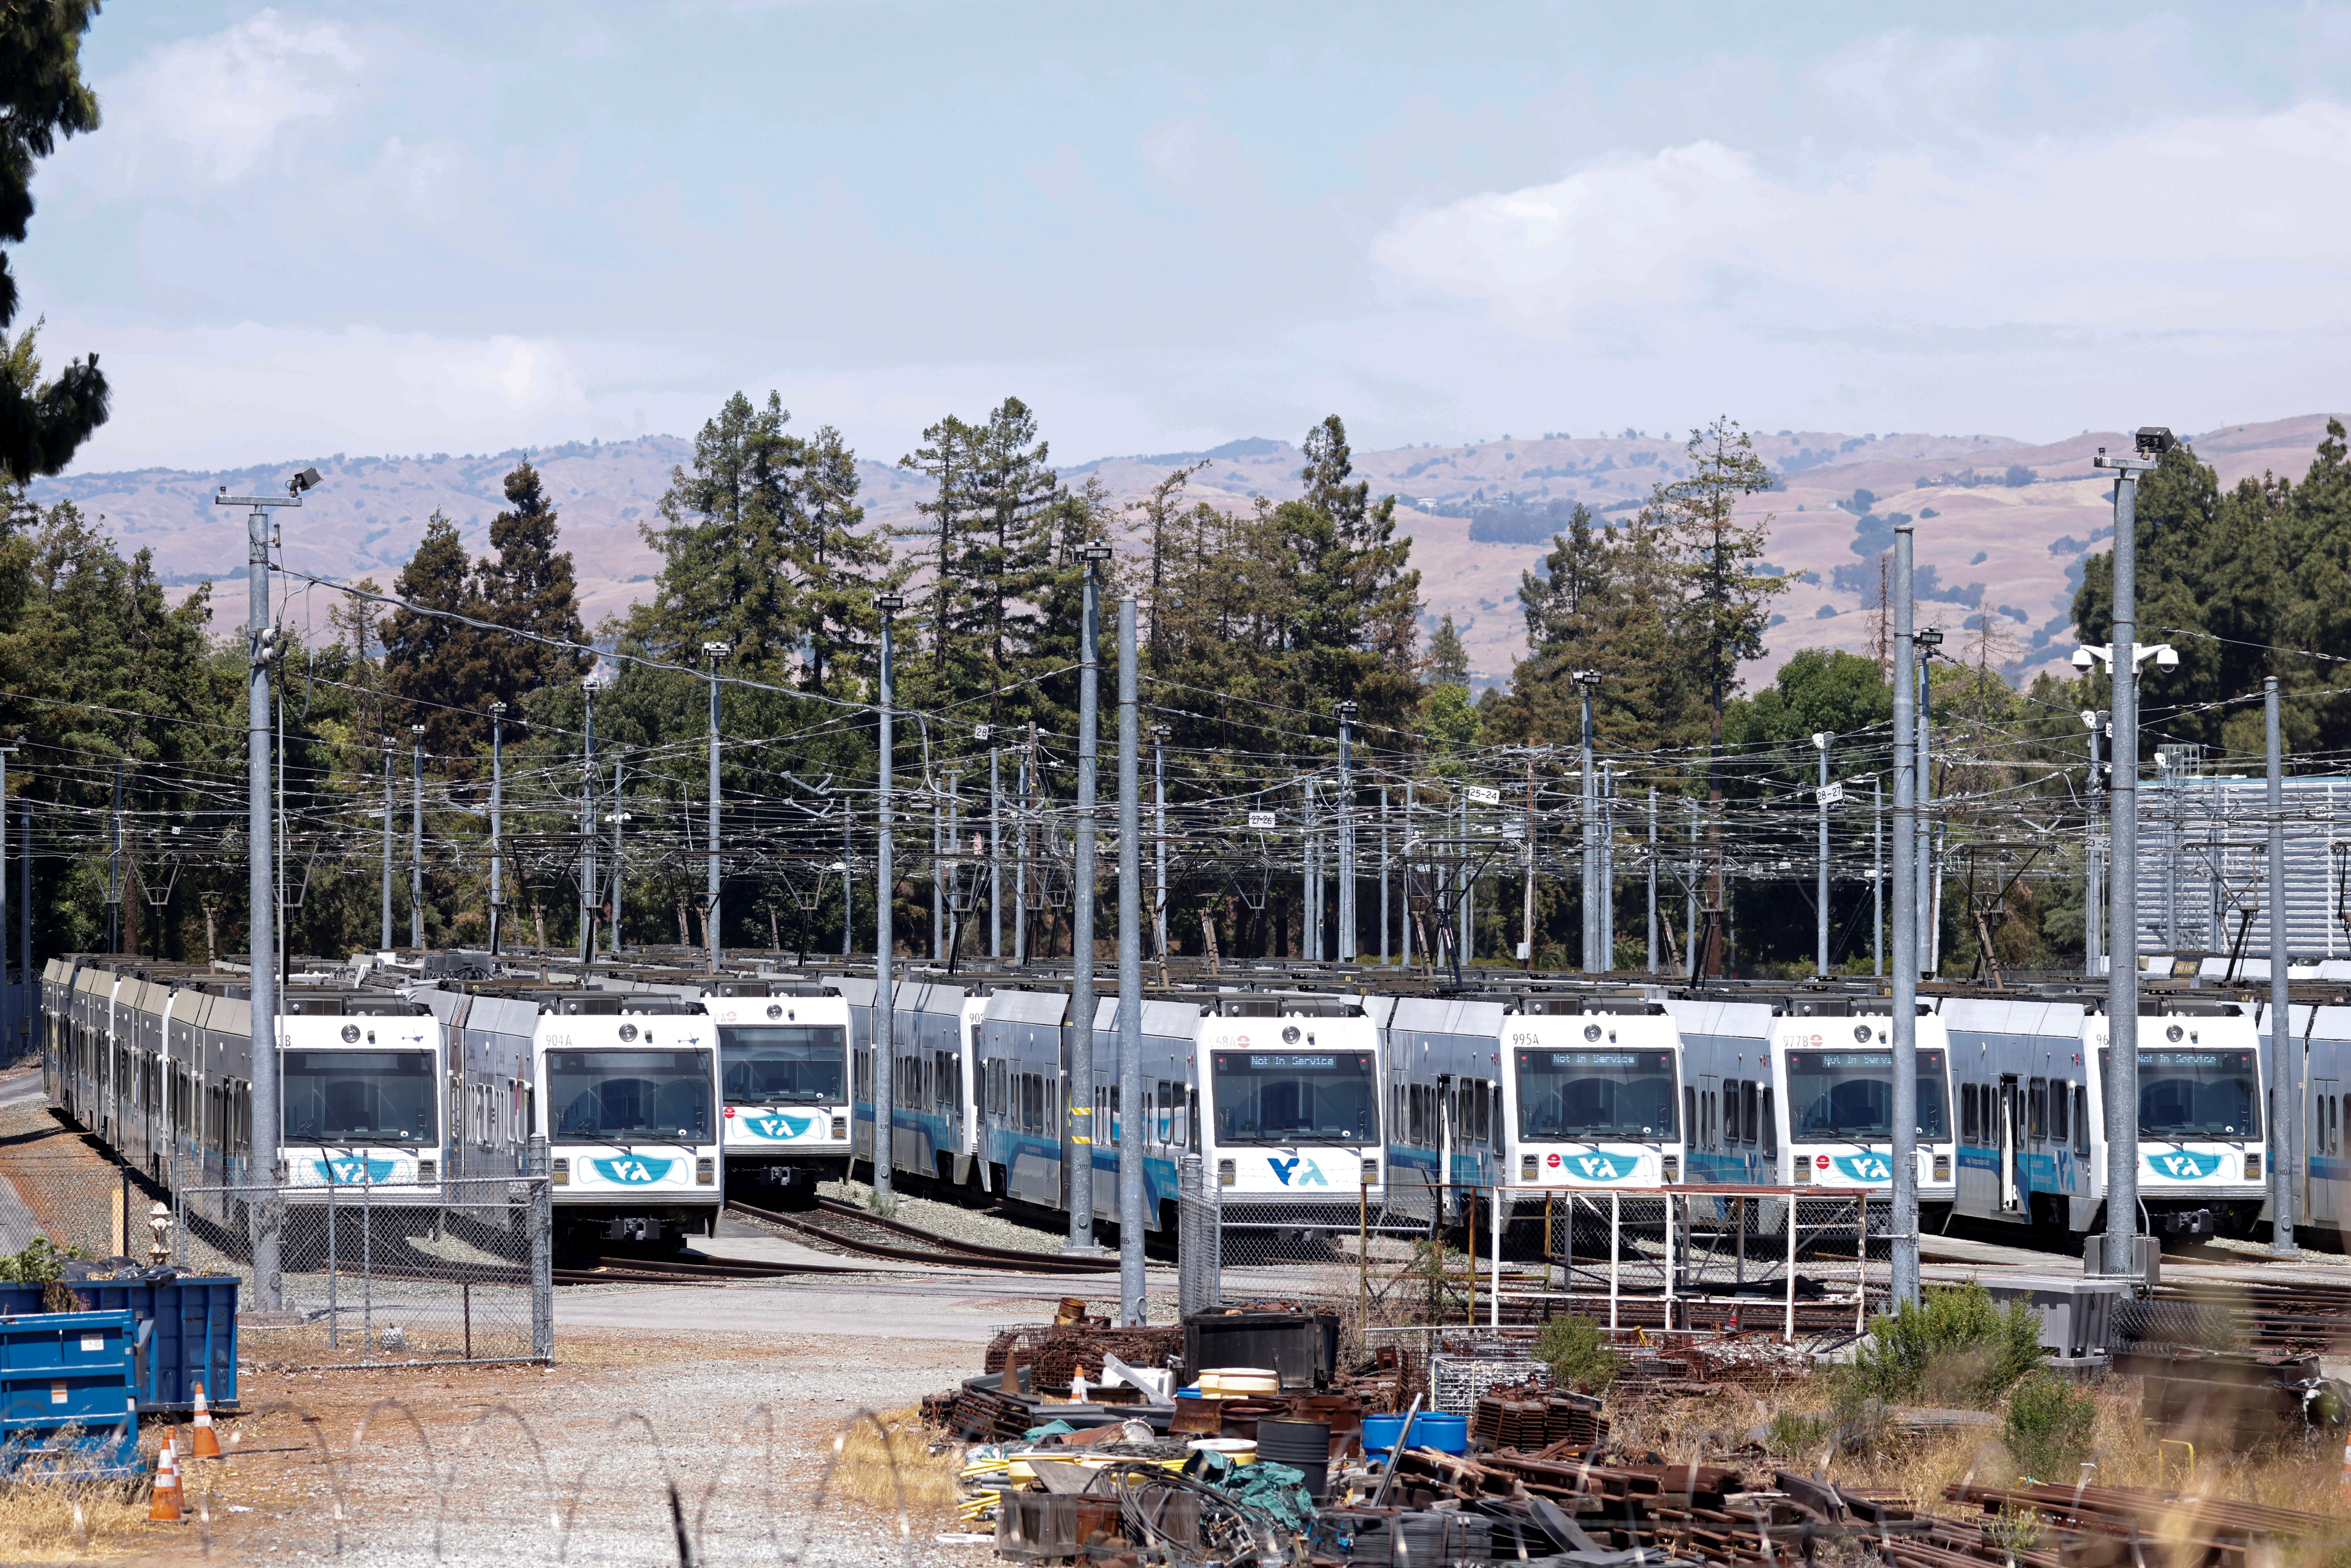 A view of the rail yard run by the Santa Clara Valley Transportation Authority in San Jose